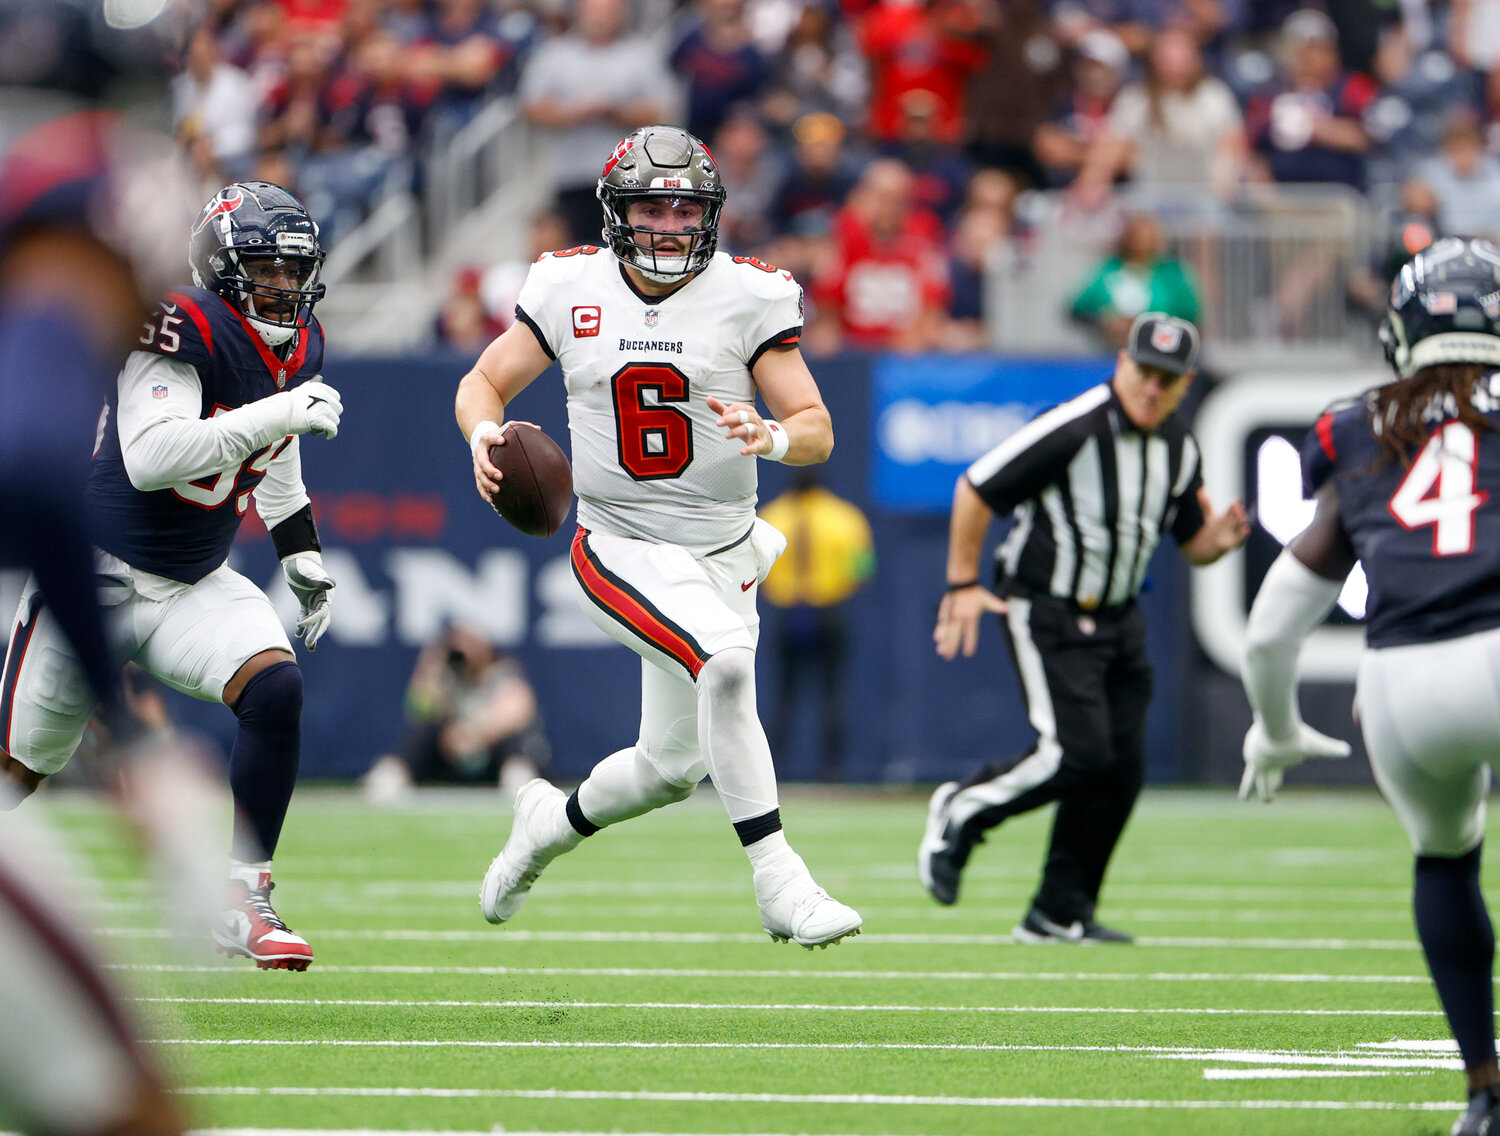 Buccaneers quarterback Baker Mayfield (6) scrambles for a first down during an NFL game between the Houston Texans and the Tampa Bay Buccaneers on November 5, 2023 in Houston.